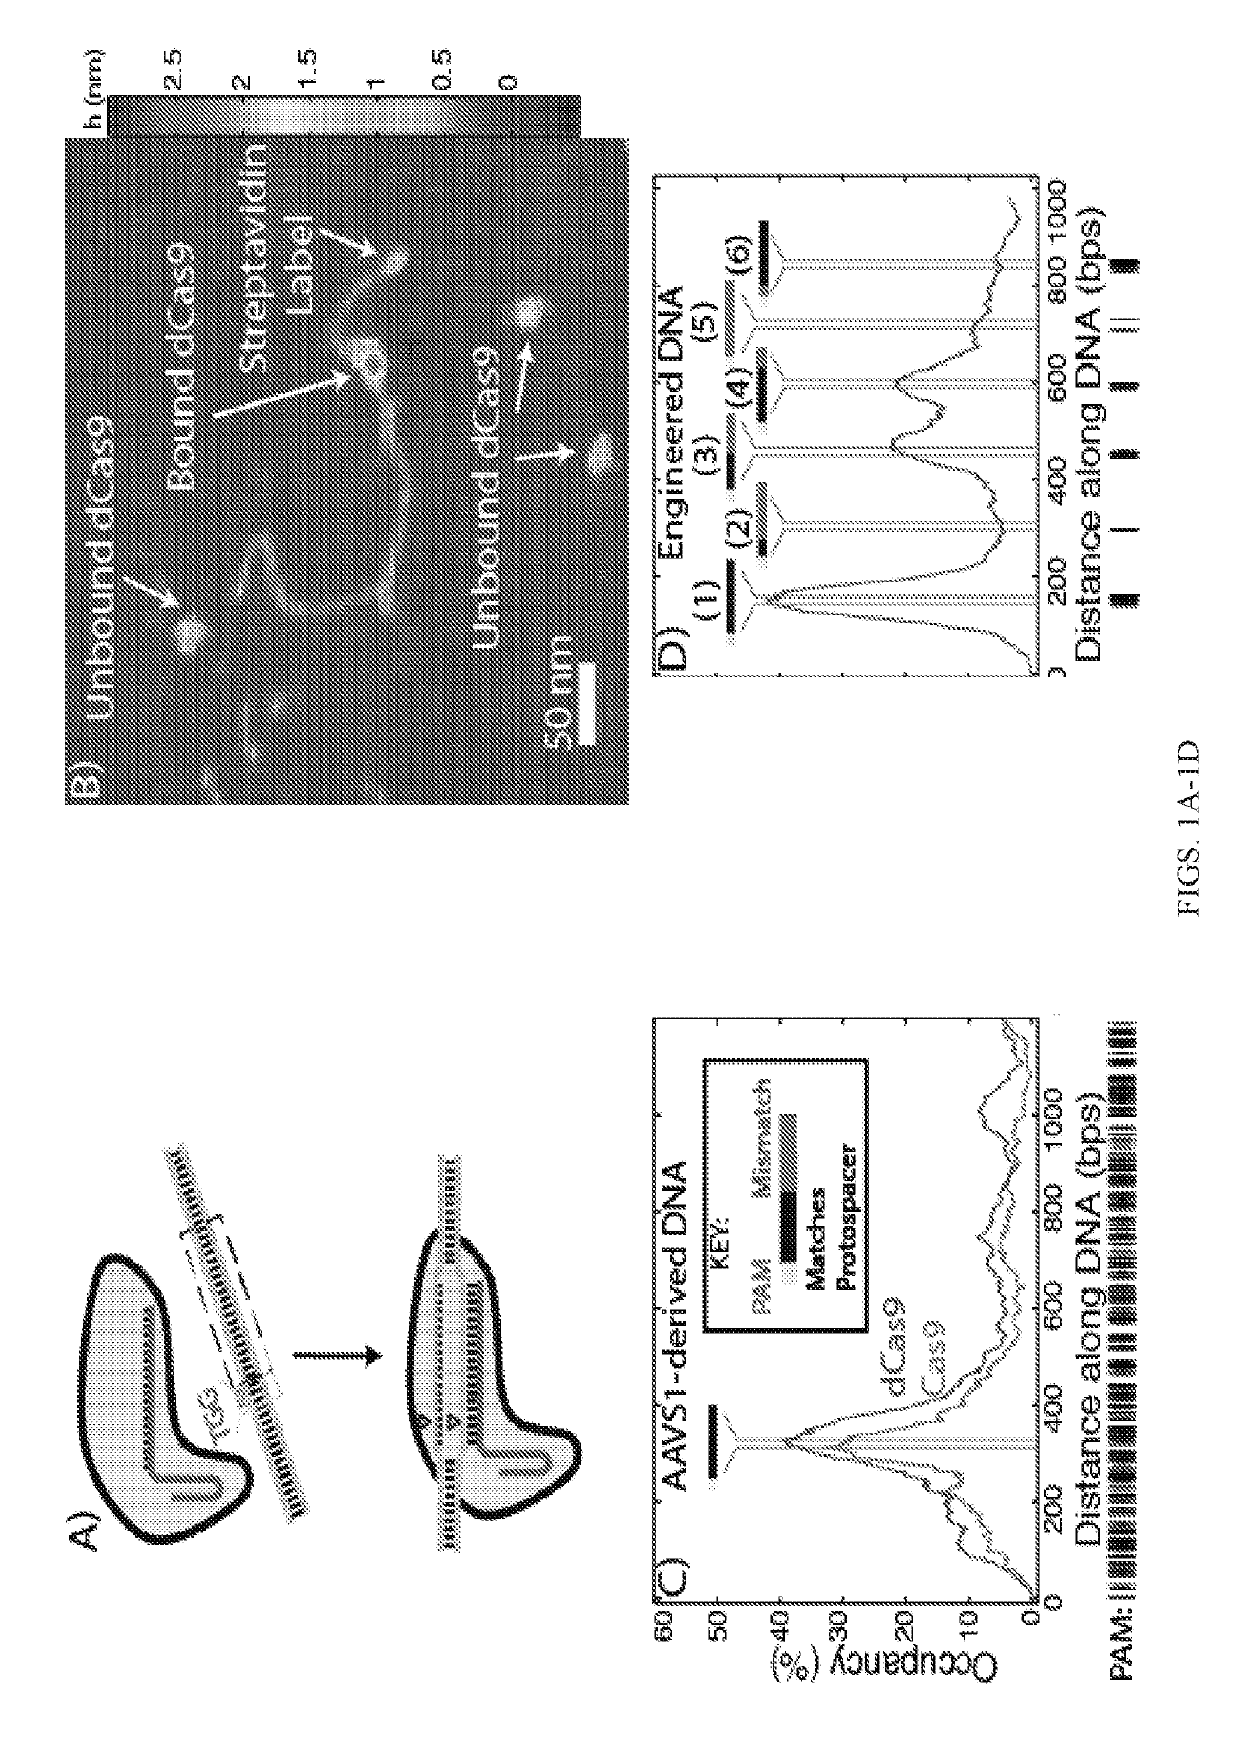 Compositions and methods of improving specificity in genomic engineering using rna-guided endonucleases